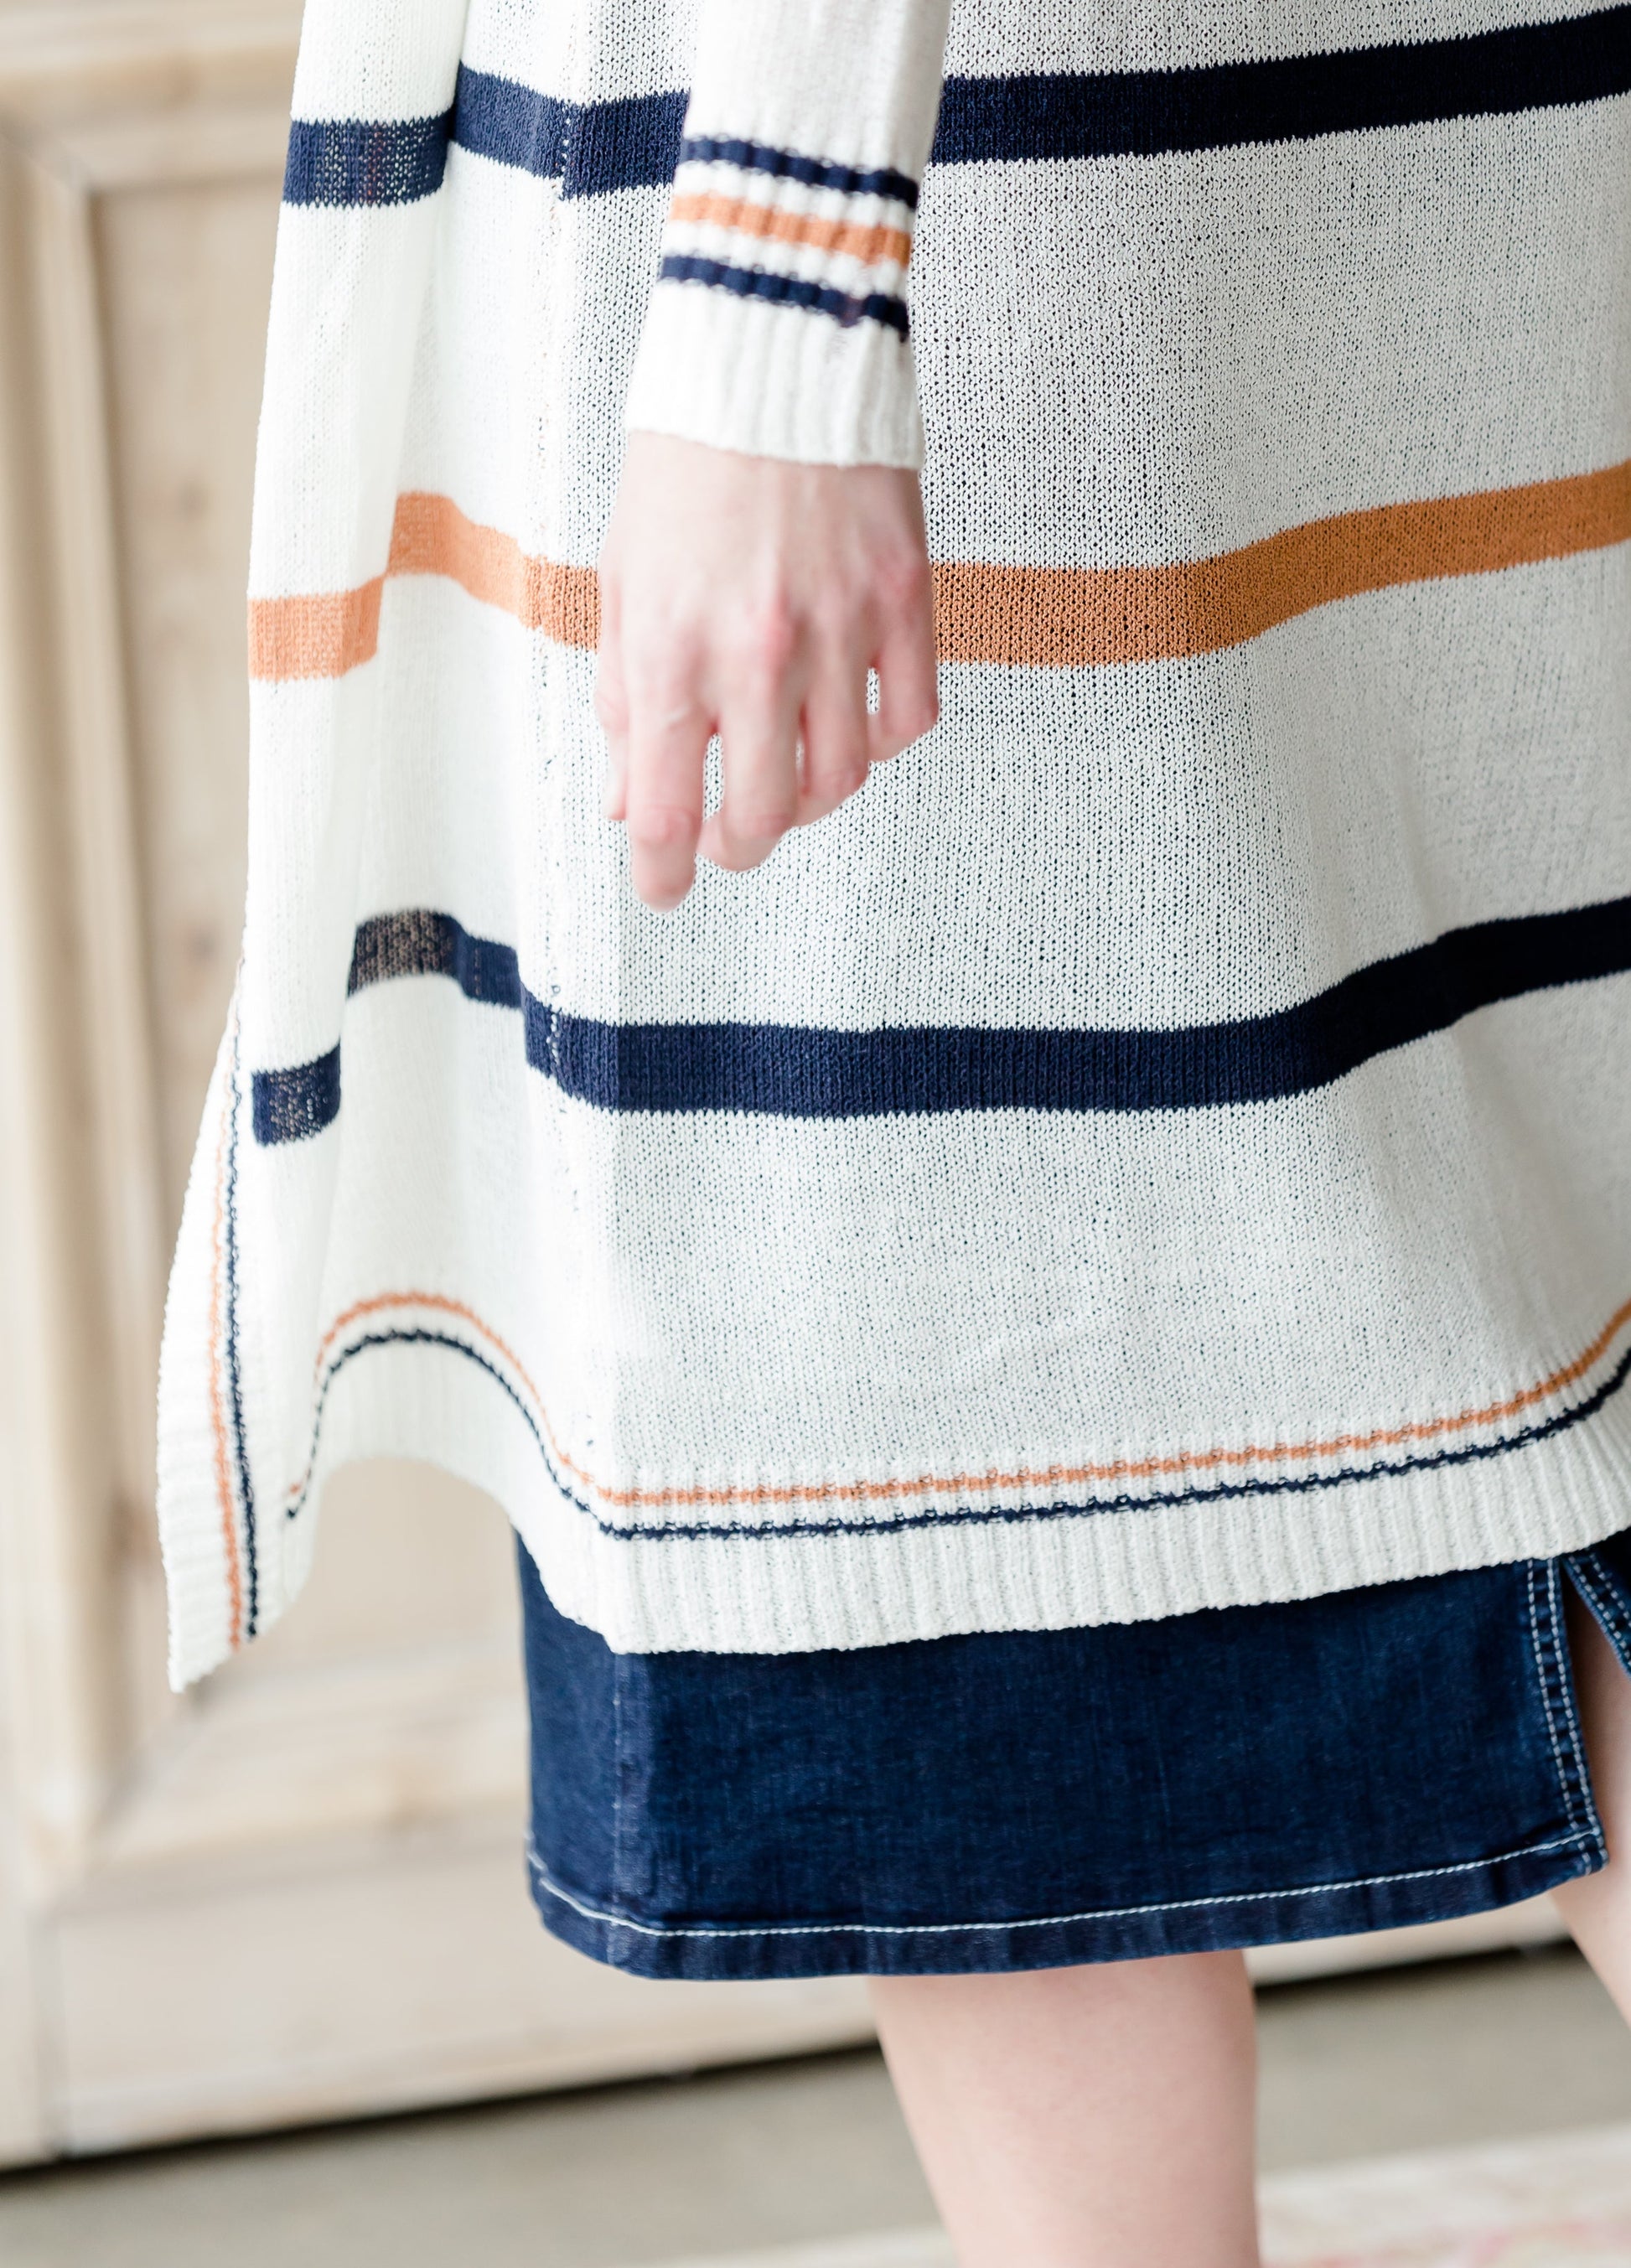 Striped Open Front Duster Cardigan - FINAL SALE Layering Essentials